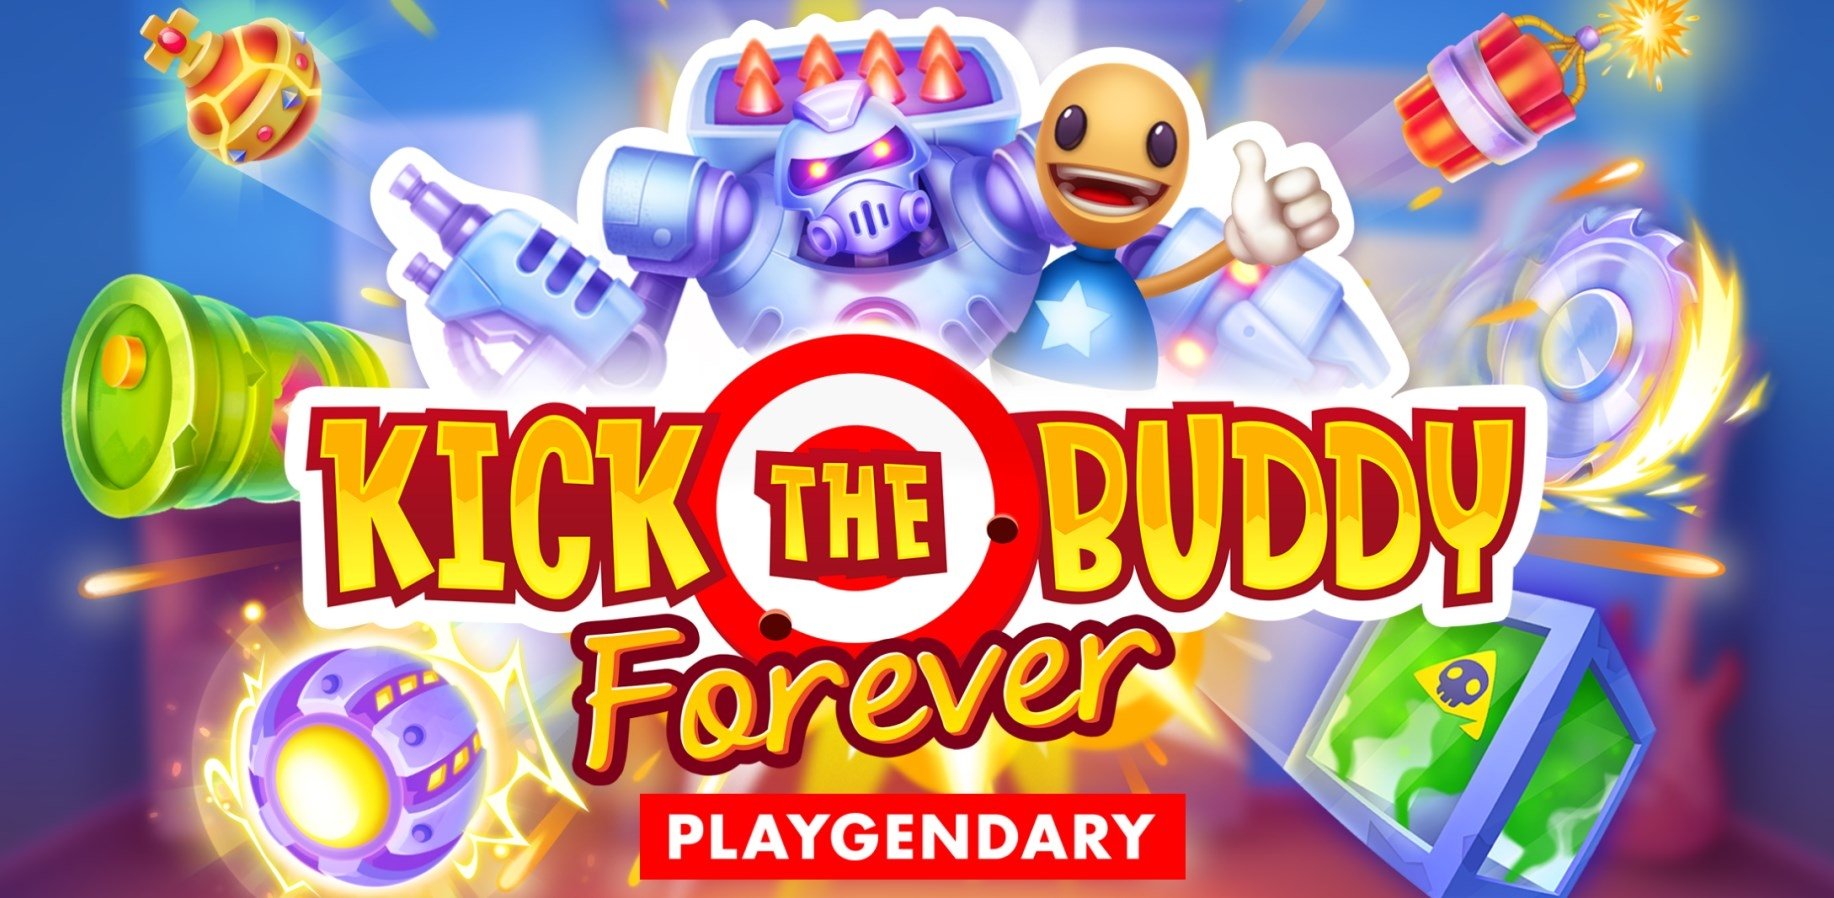 kick the buddy forever pc